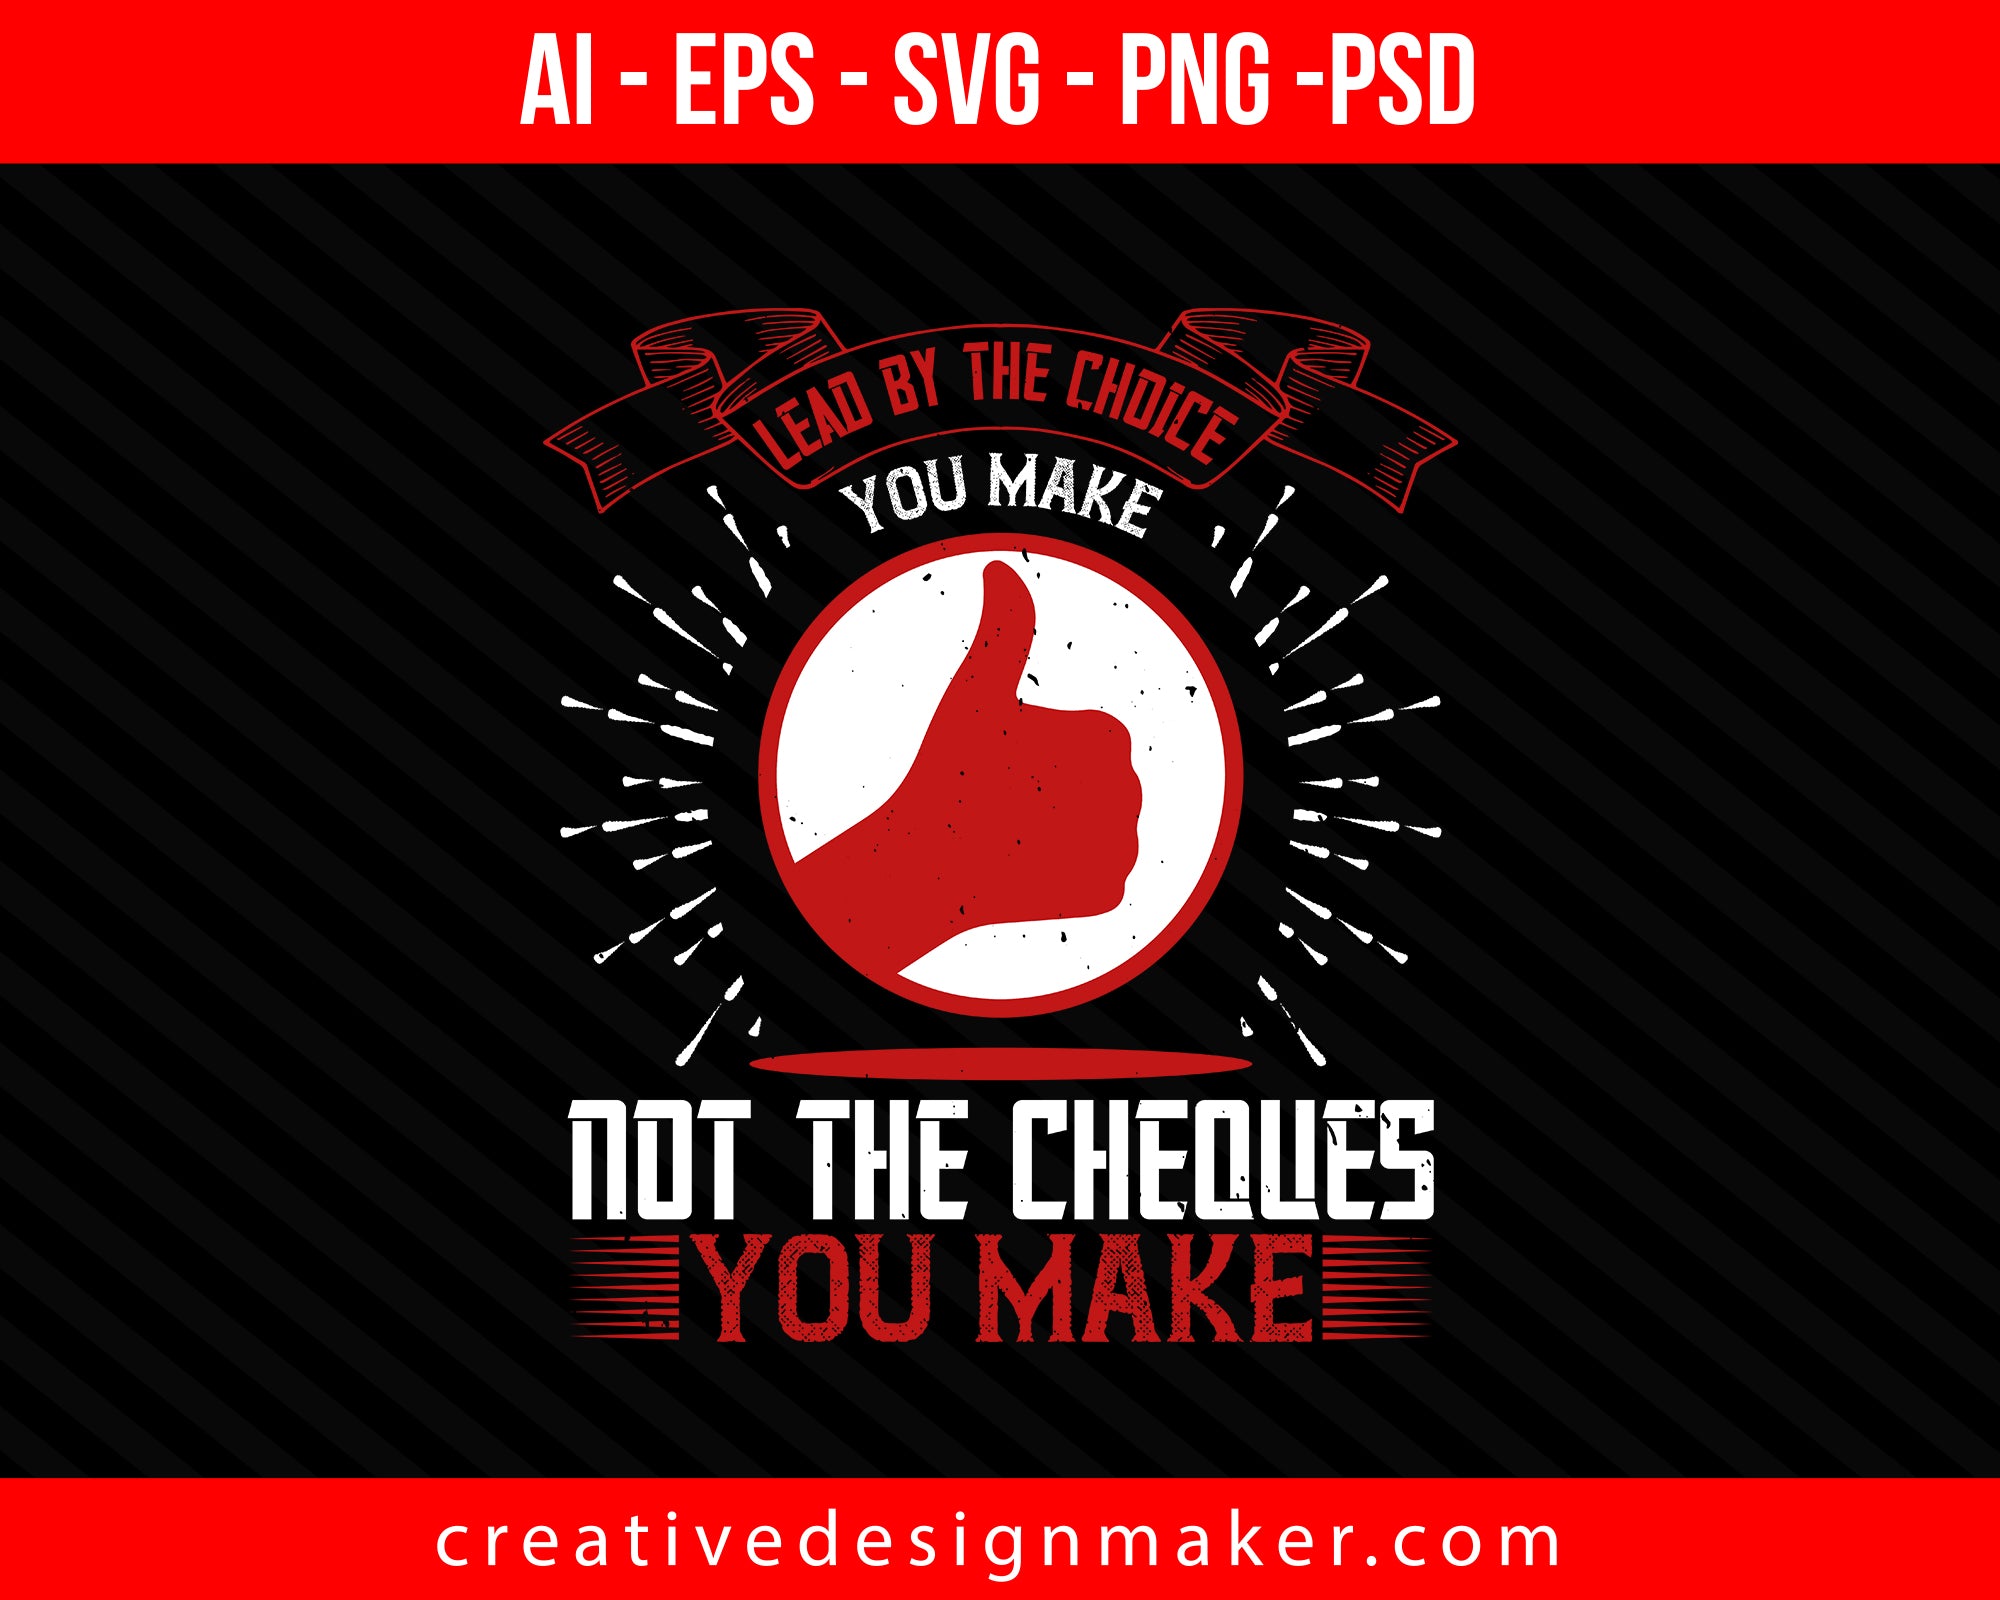 Lead by the choice you make, not the cheques you make Coaching Print Ready Editable T-Shirt SVG Design!